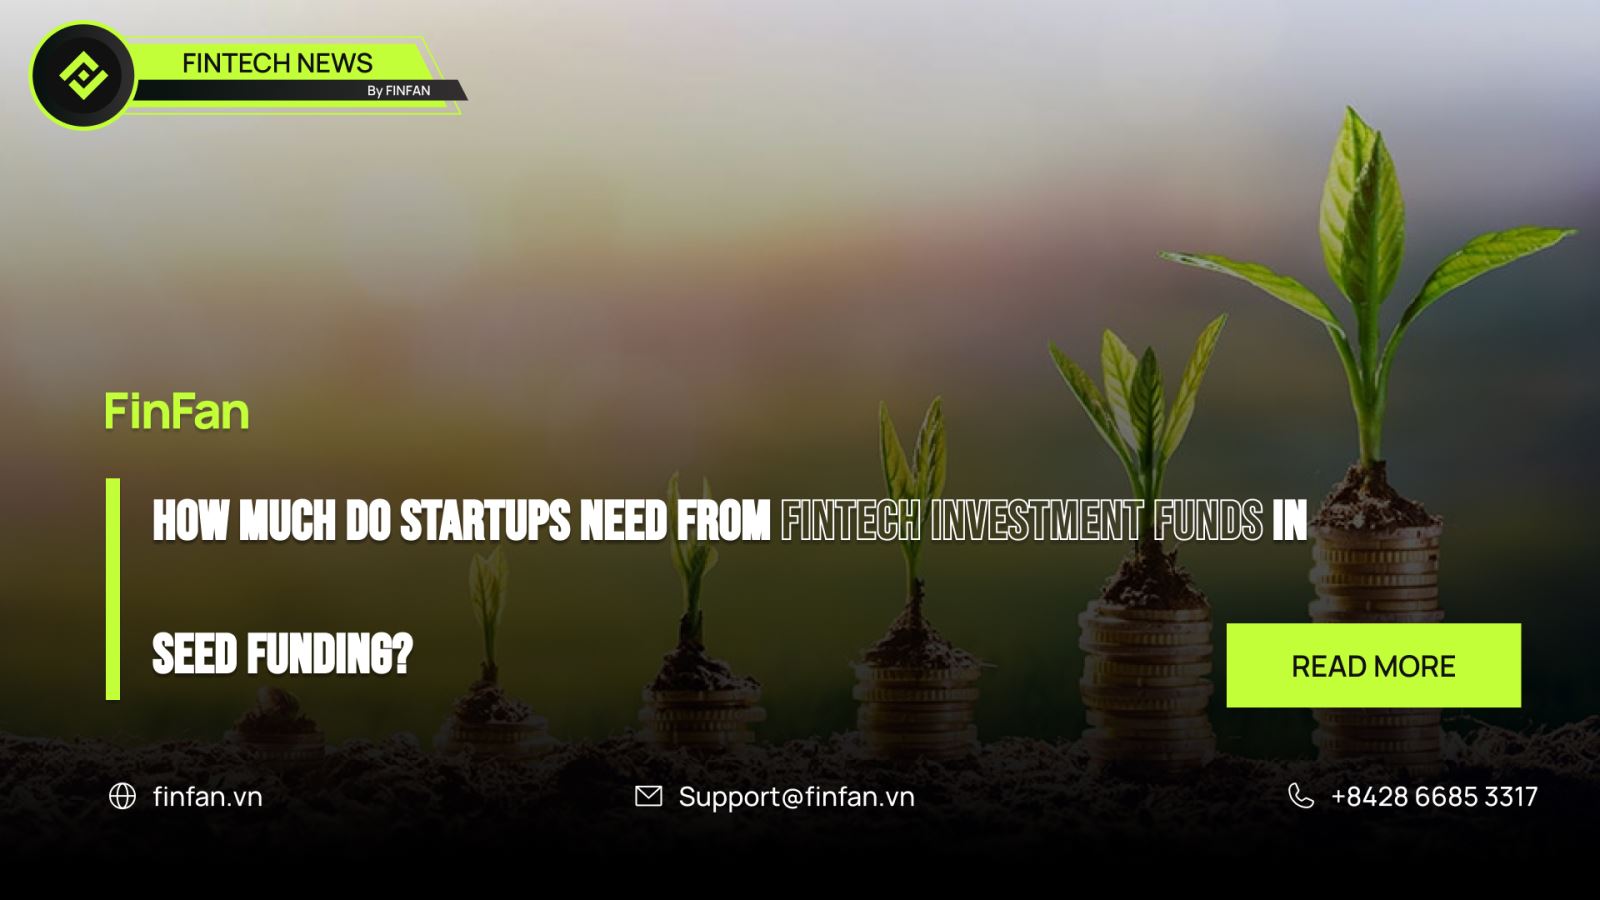 How much do startups need from fintech investment funds in seed funding?